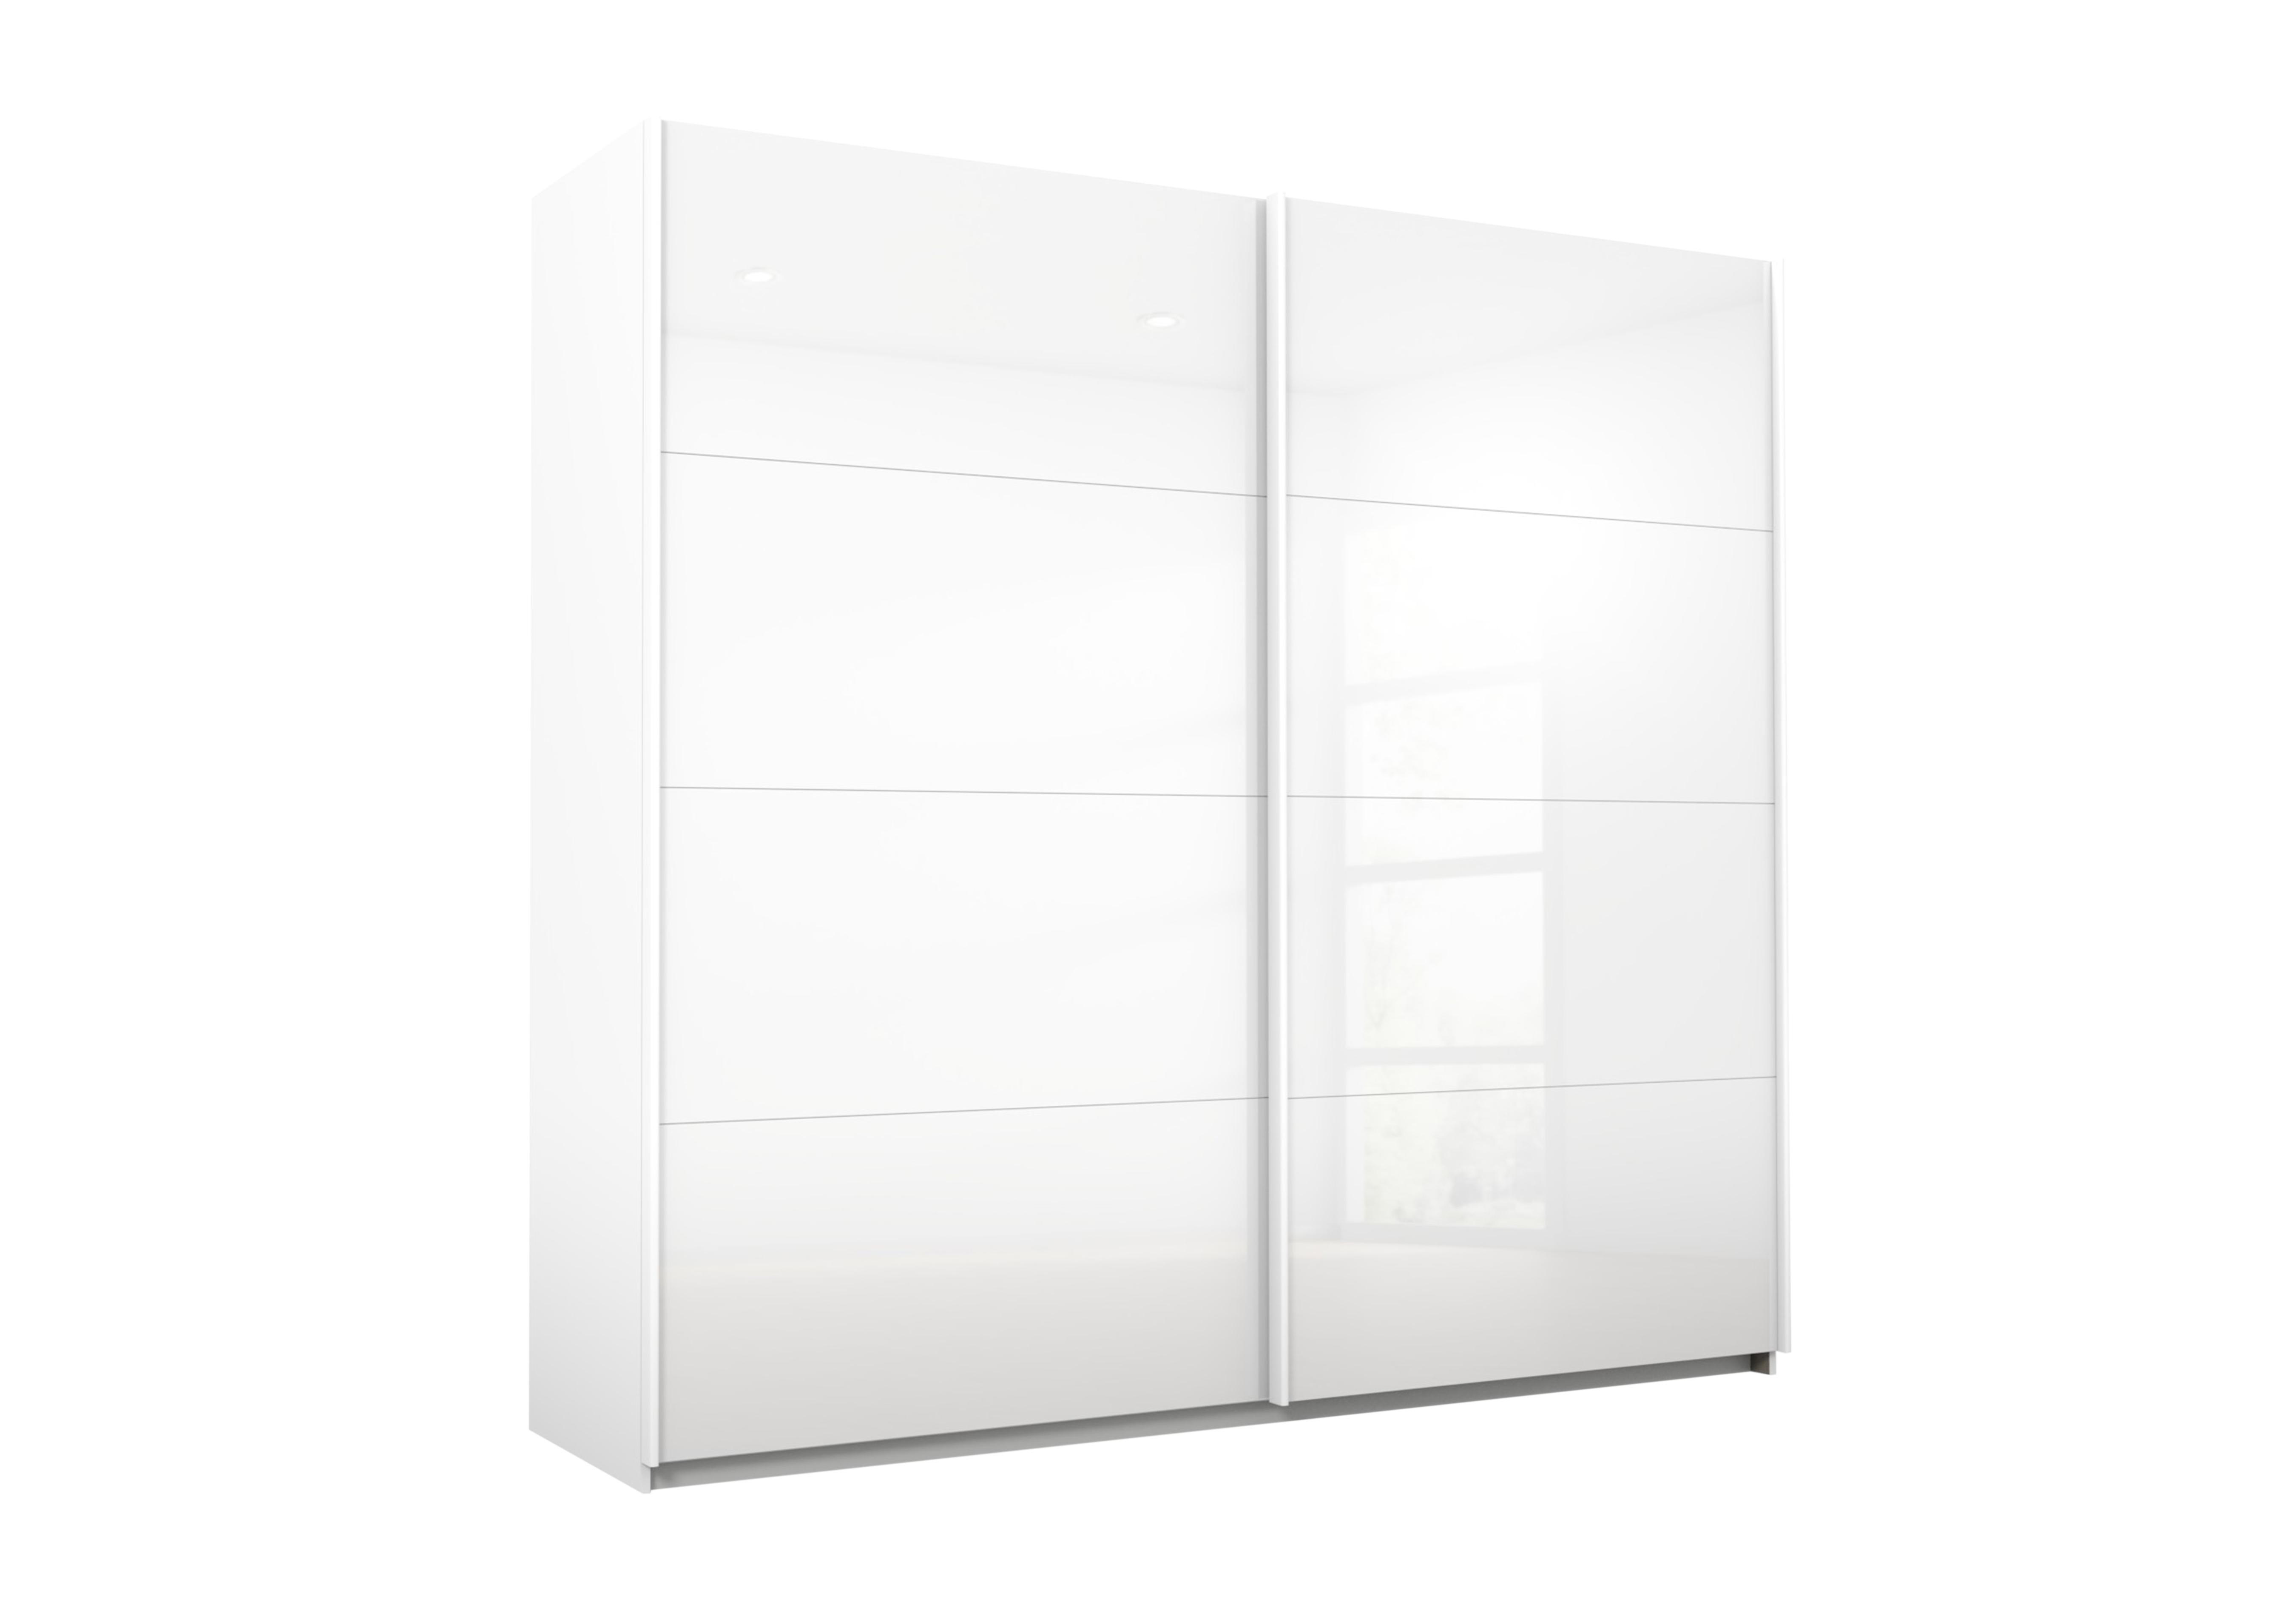 Lima 226cm 2 Door Sliding Wardrobe with Glass Front 210cm Tall in Ag354alp Wht/Wht Gls on Furniture Village